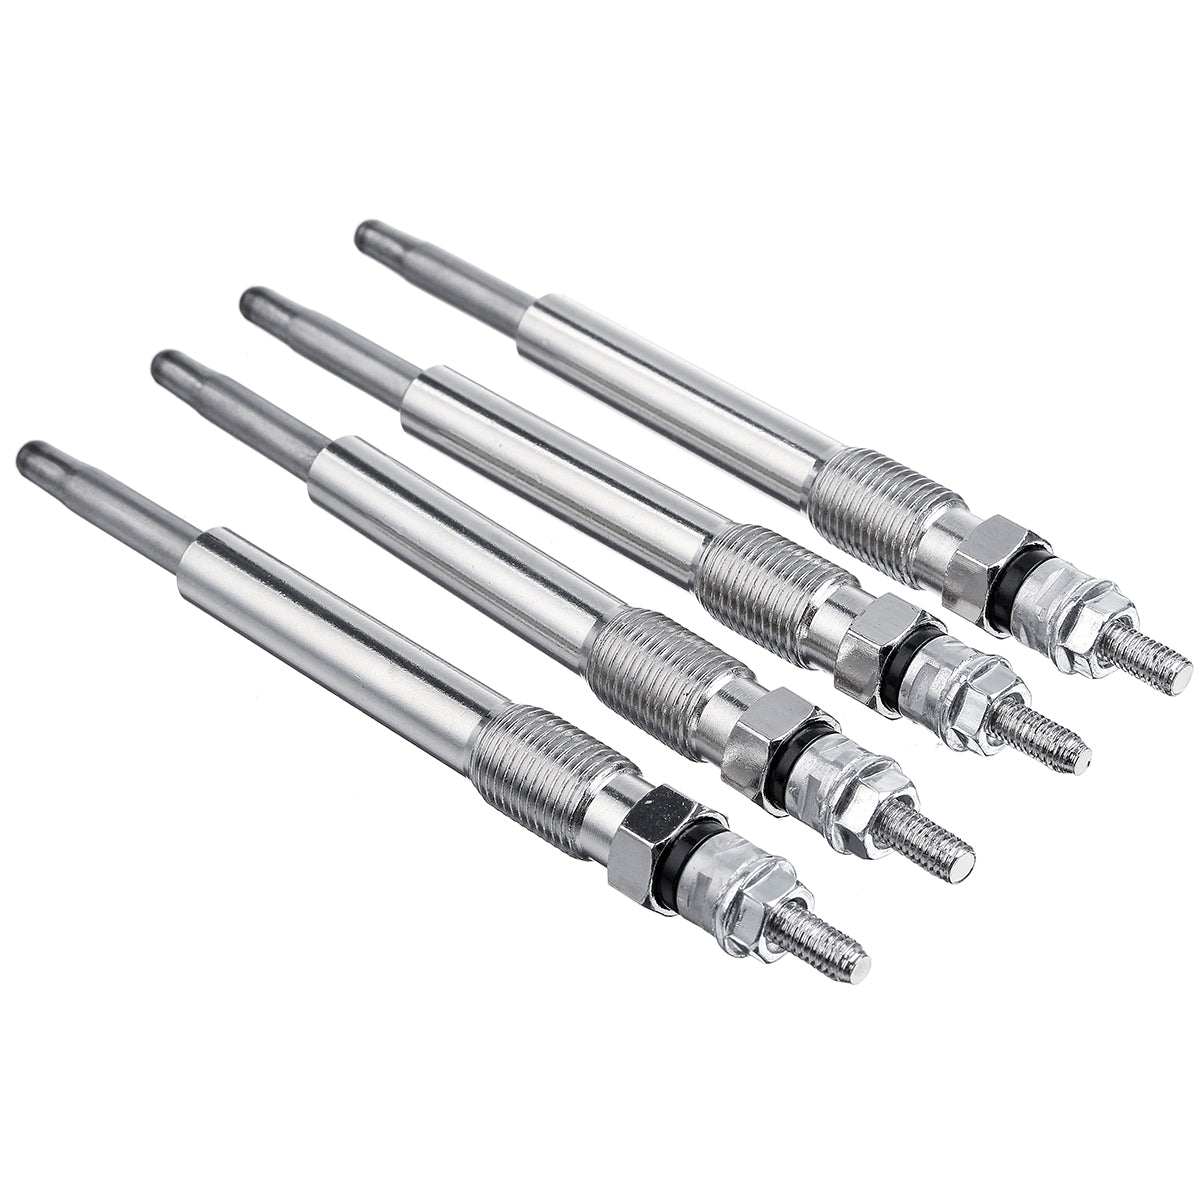 Gray 4Pcs Diesel Heater Glow Plugs GP504X4 For Citroen For Fiat For Peugeot 206 For Suzuki For Lancia 2.0 HDI